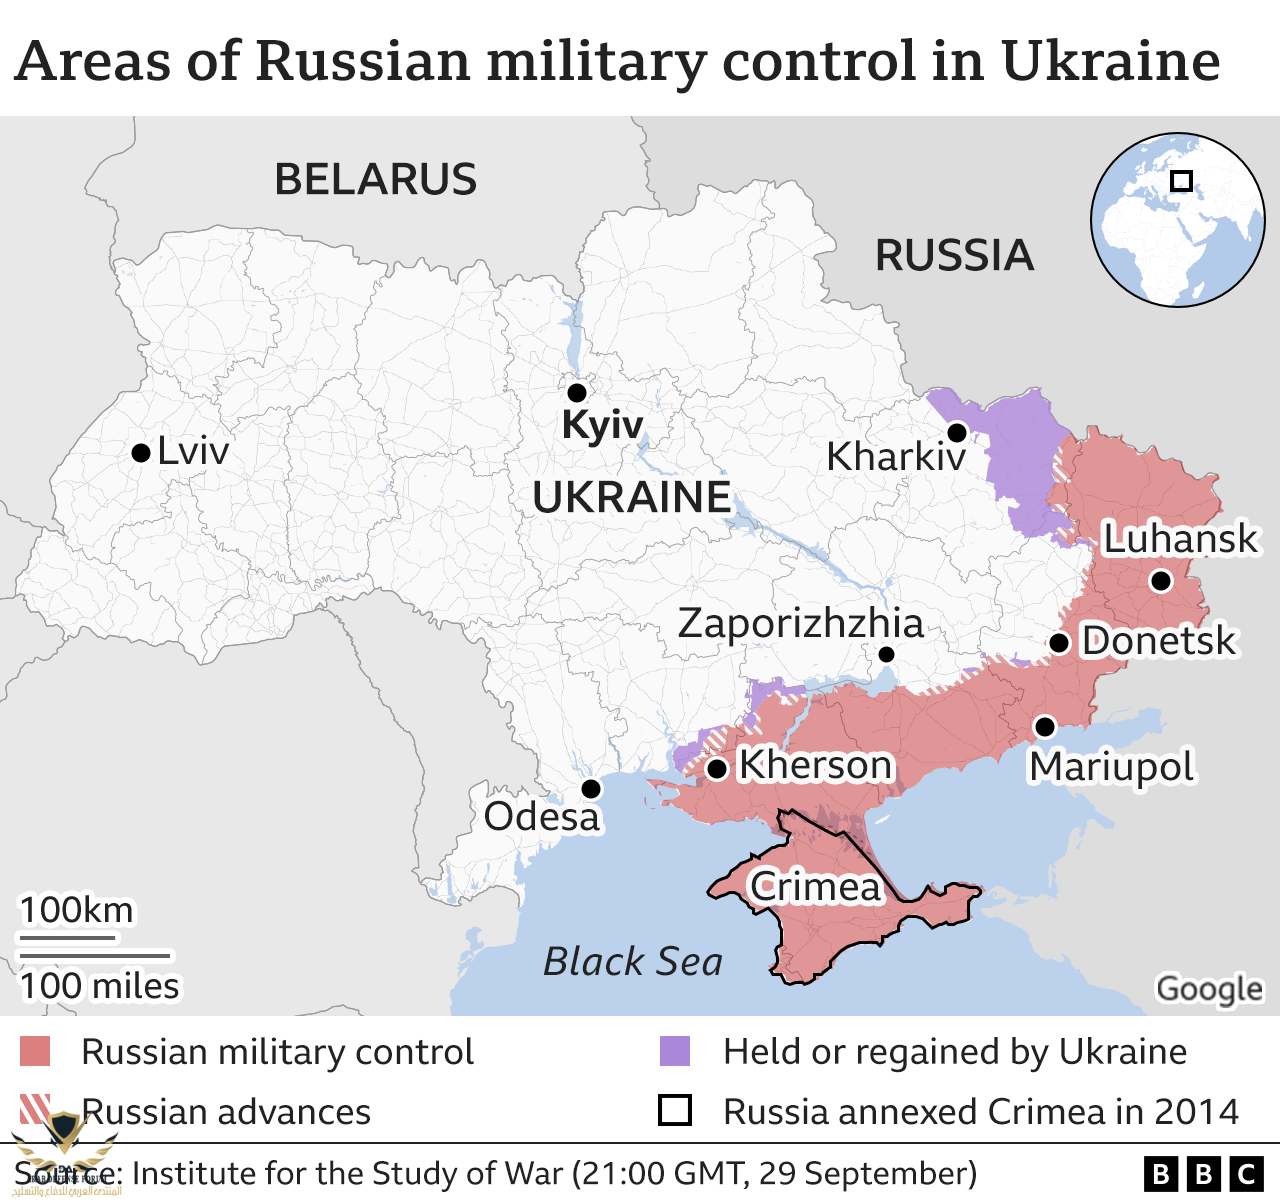 _126907087_ukraine_russian_control_areas_map_2x640-nc.png